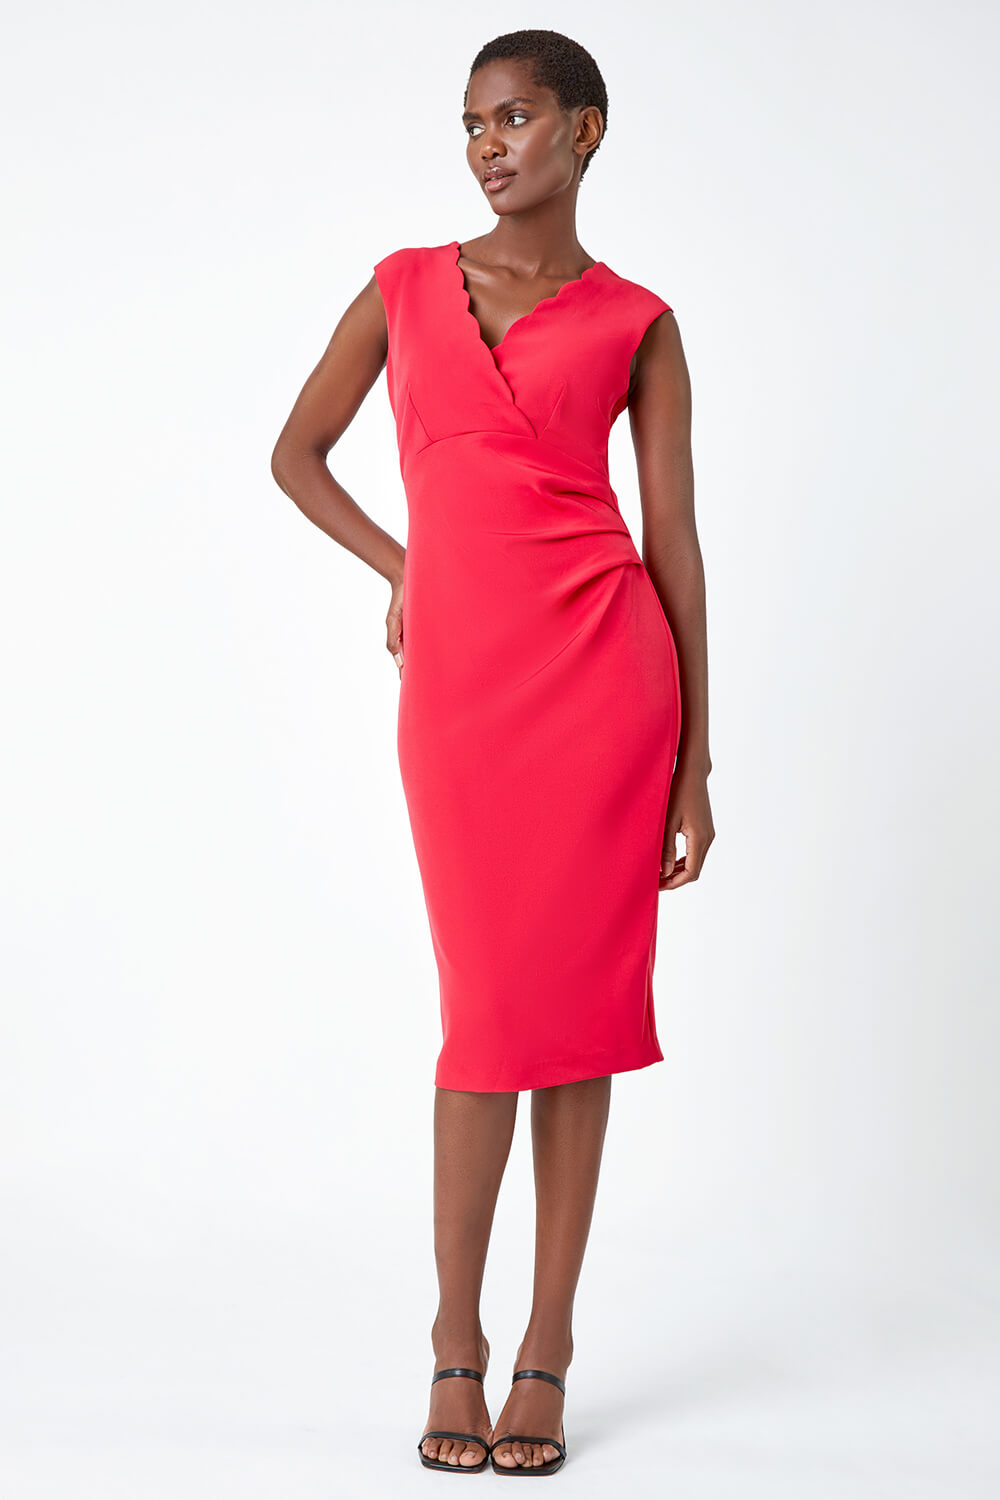 Red Sleeveless Pleated Stretch Ruched Dress, Image 2 of 5